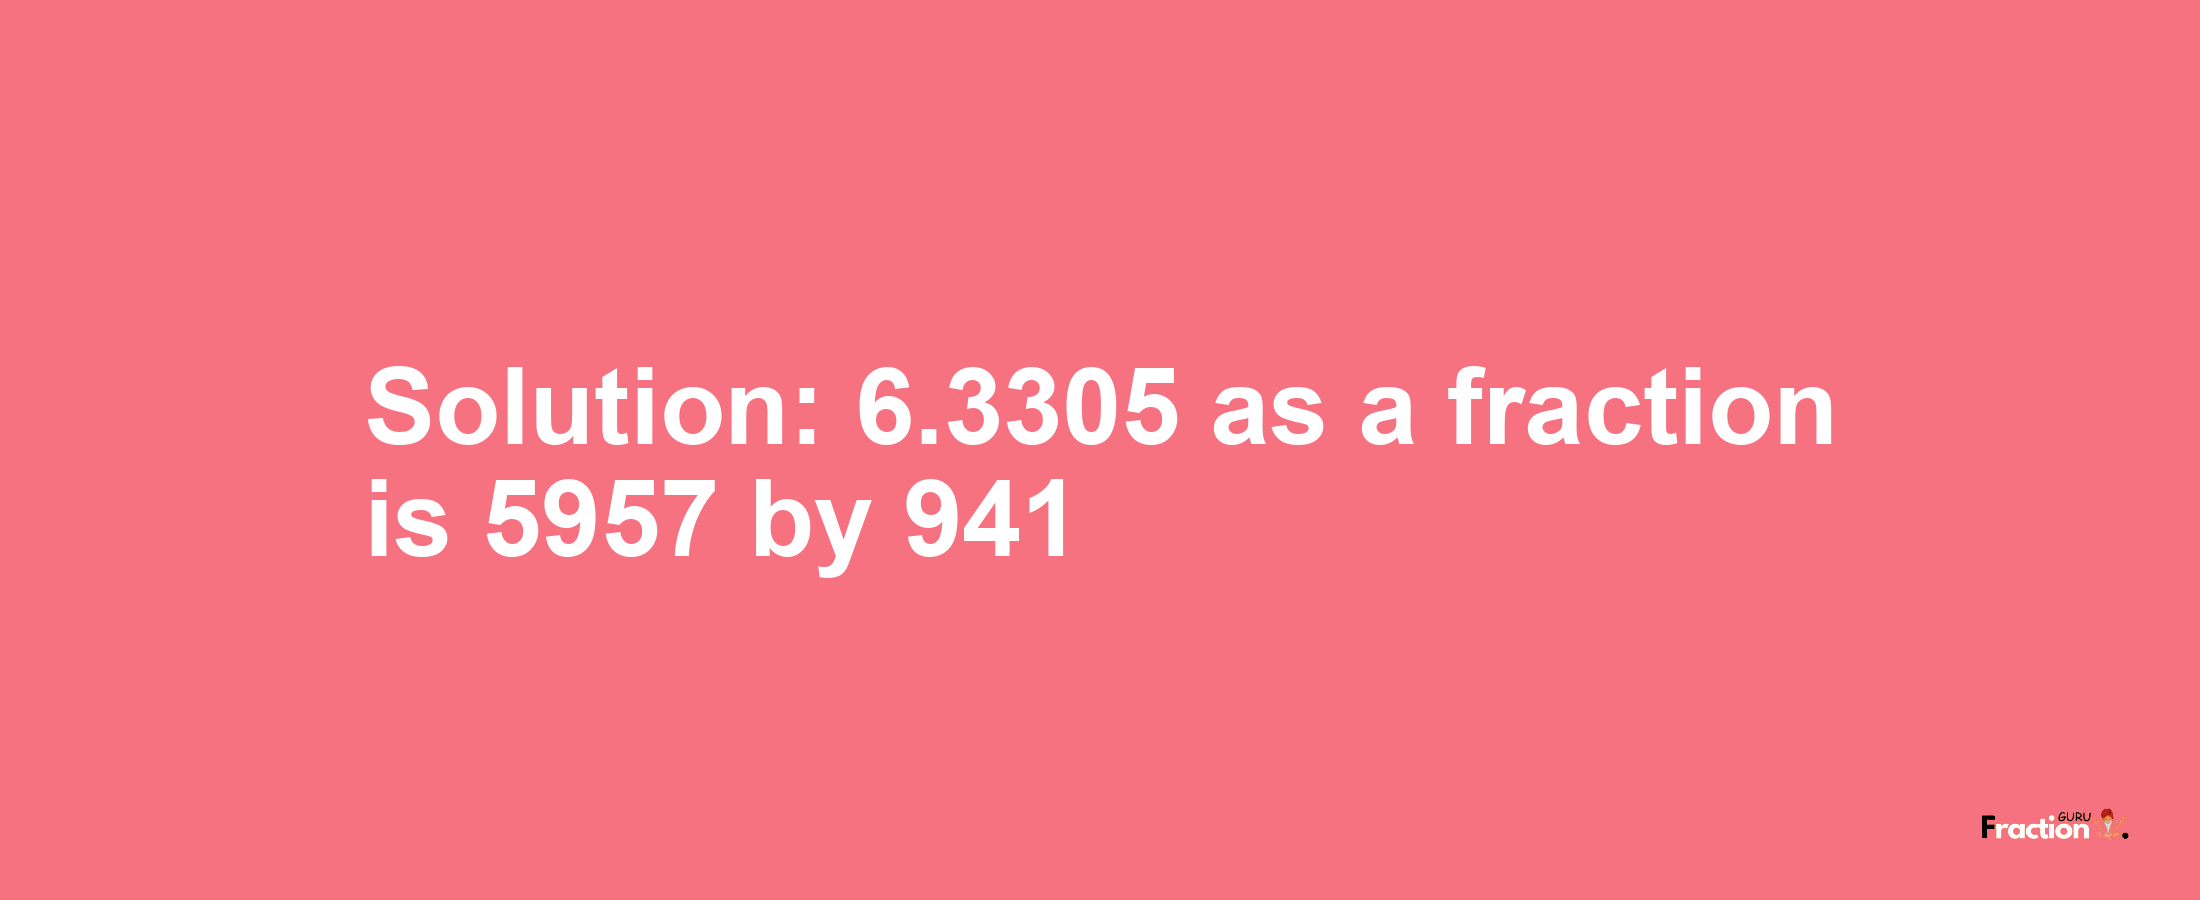 Solution:6.3305 as a fraction is 5957/941